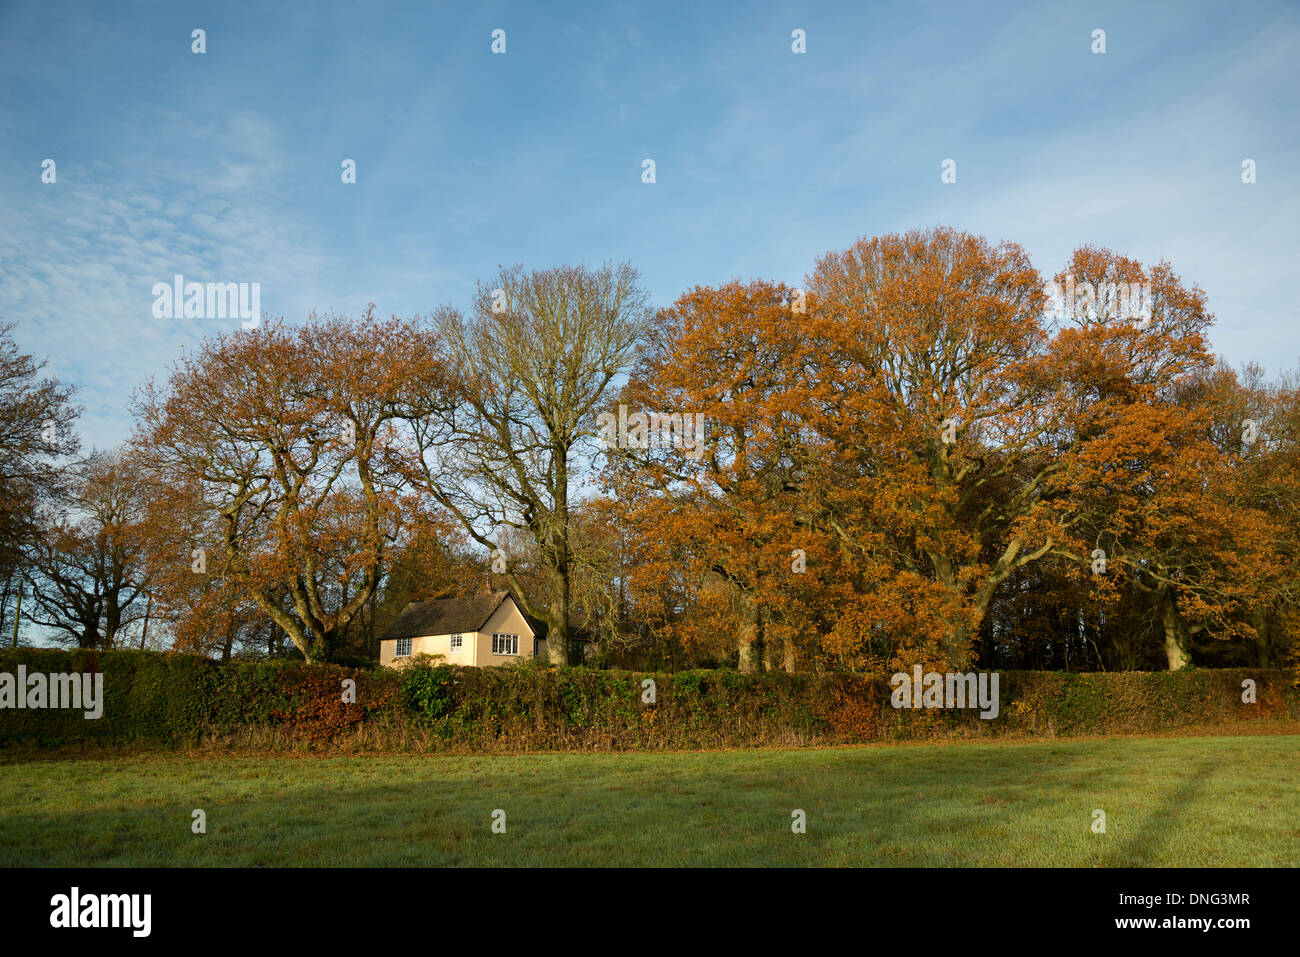 Late Autumn sunny day in rural England. A grass field with Oak trees and long hedge. House nestled amongst the trees. Blue sky. Stock Photo